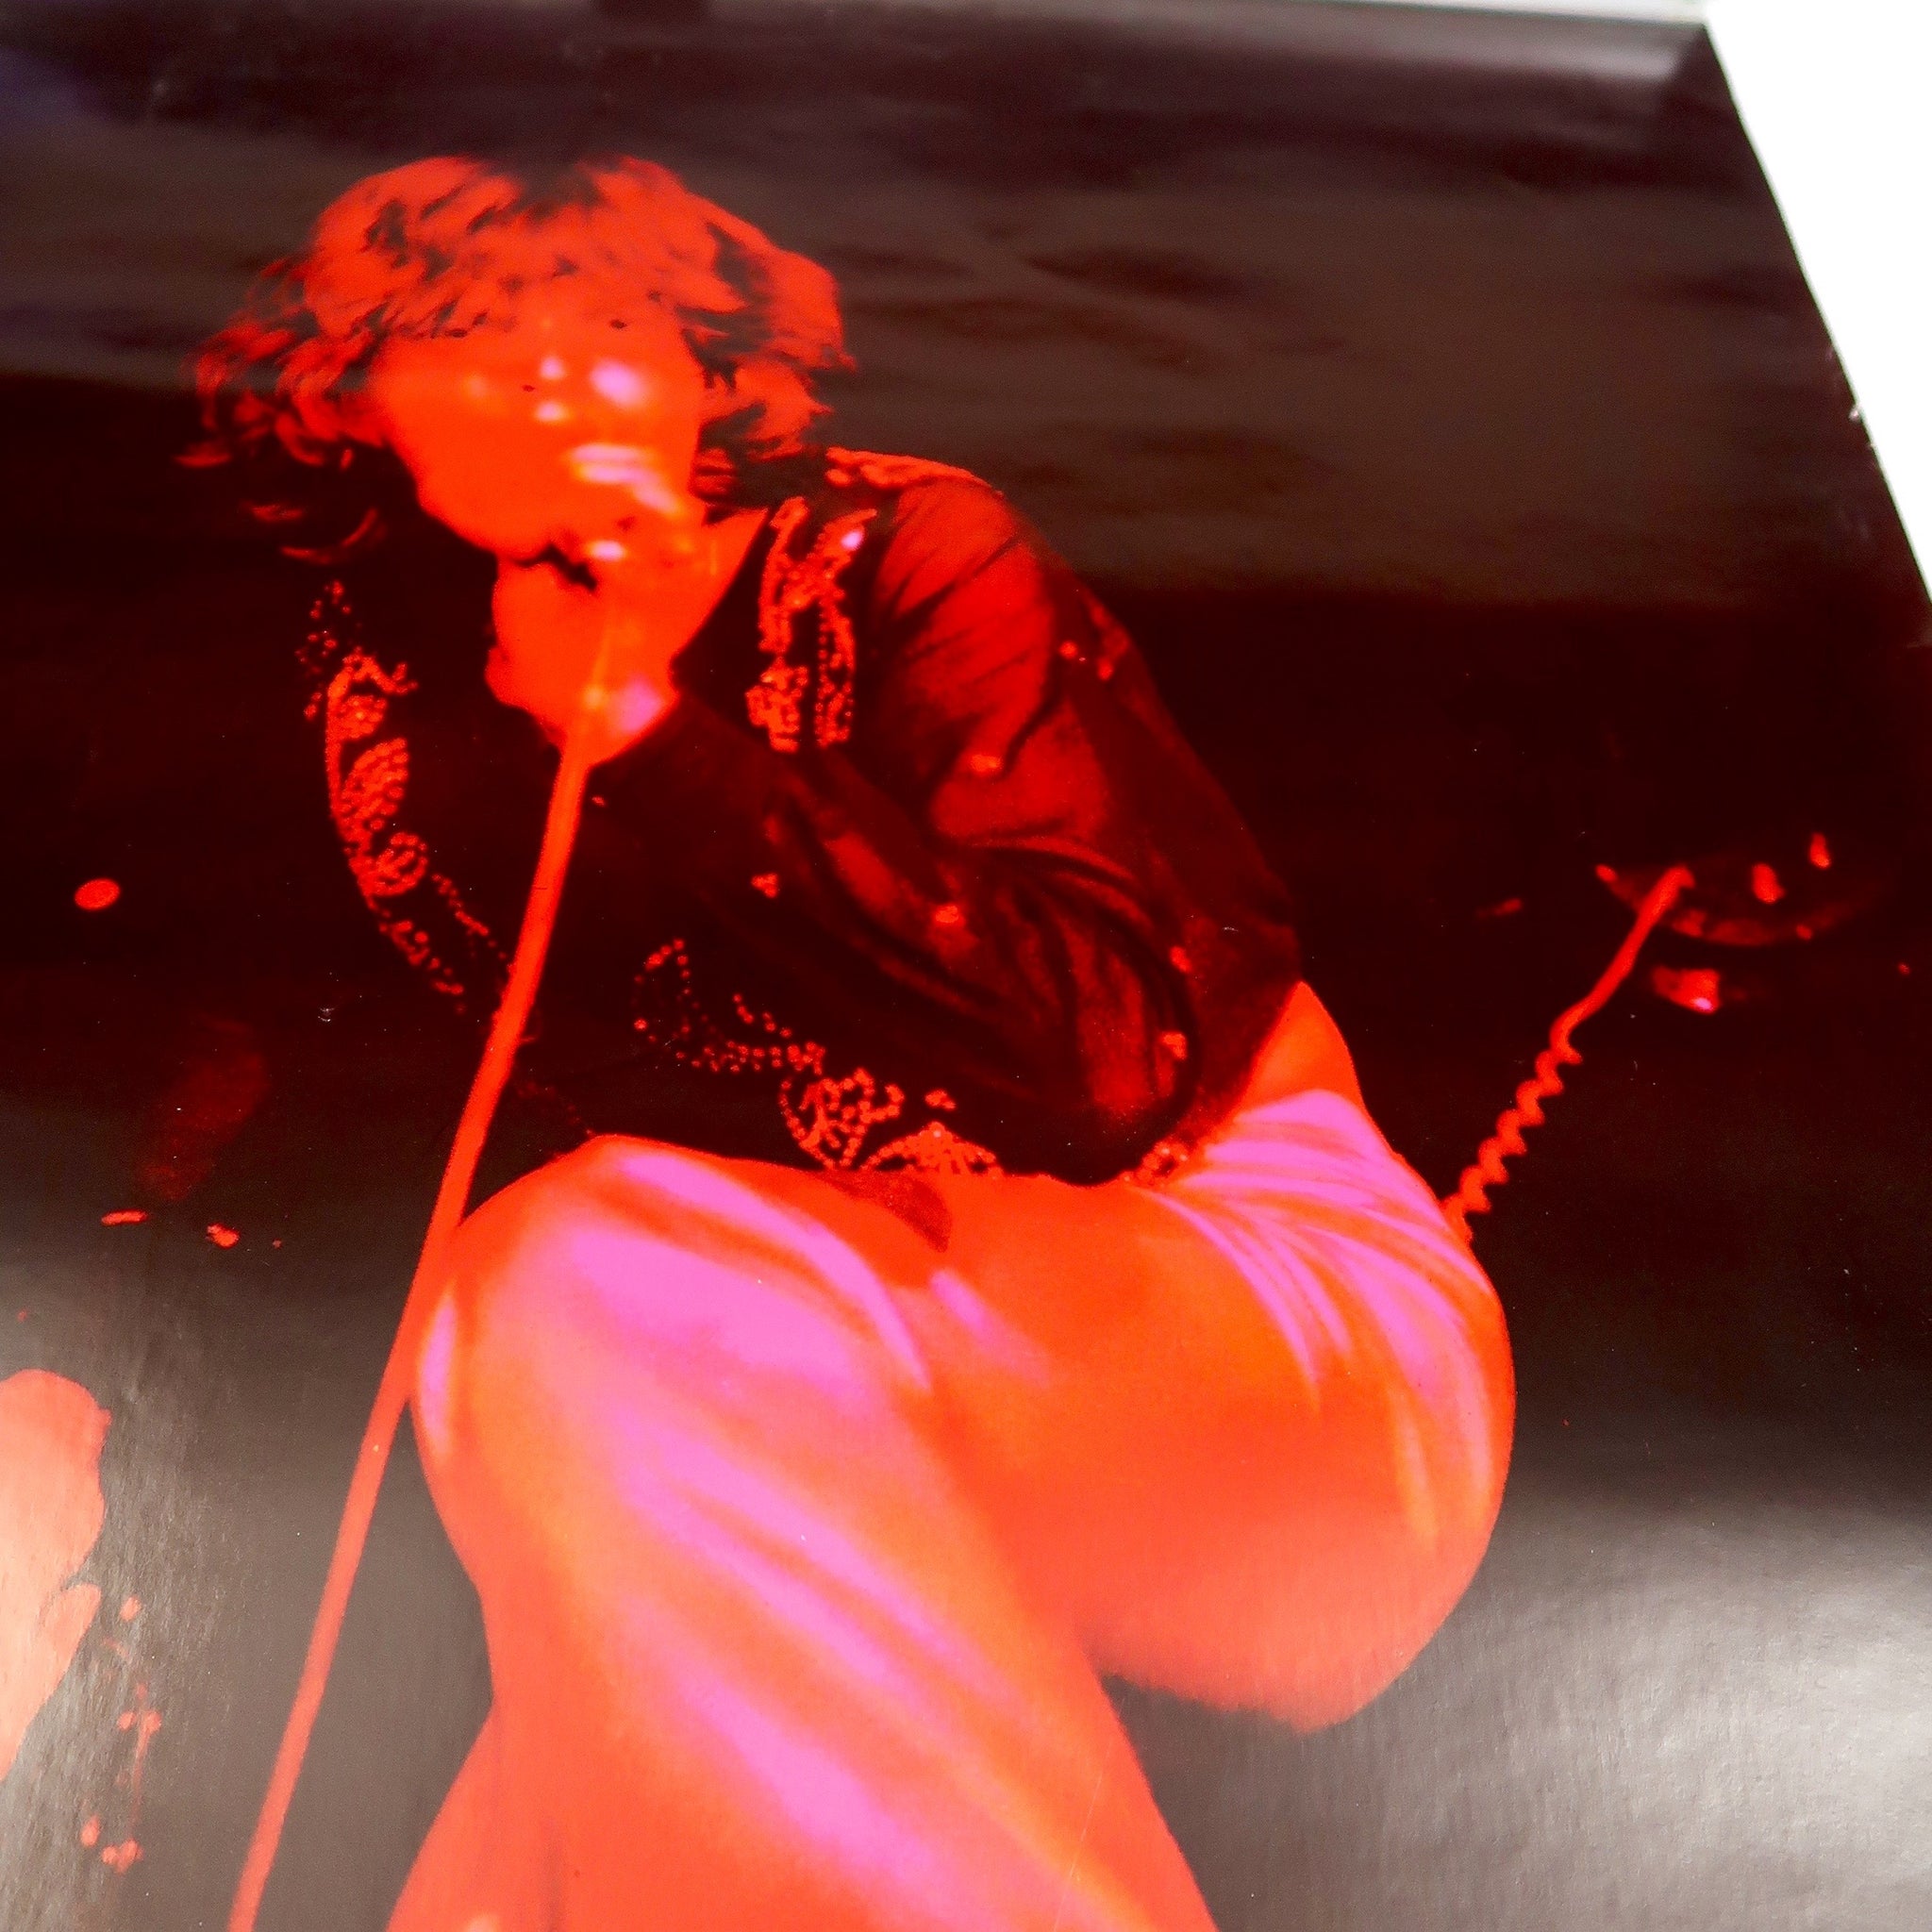 Original 1970's Psychedelic  poster of Mick Jagger